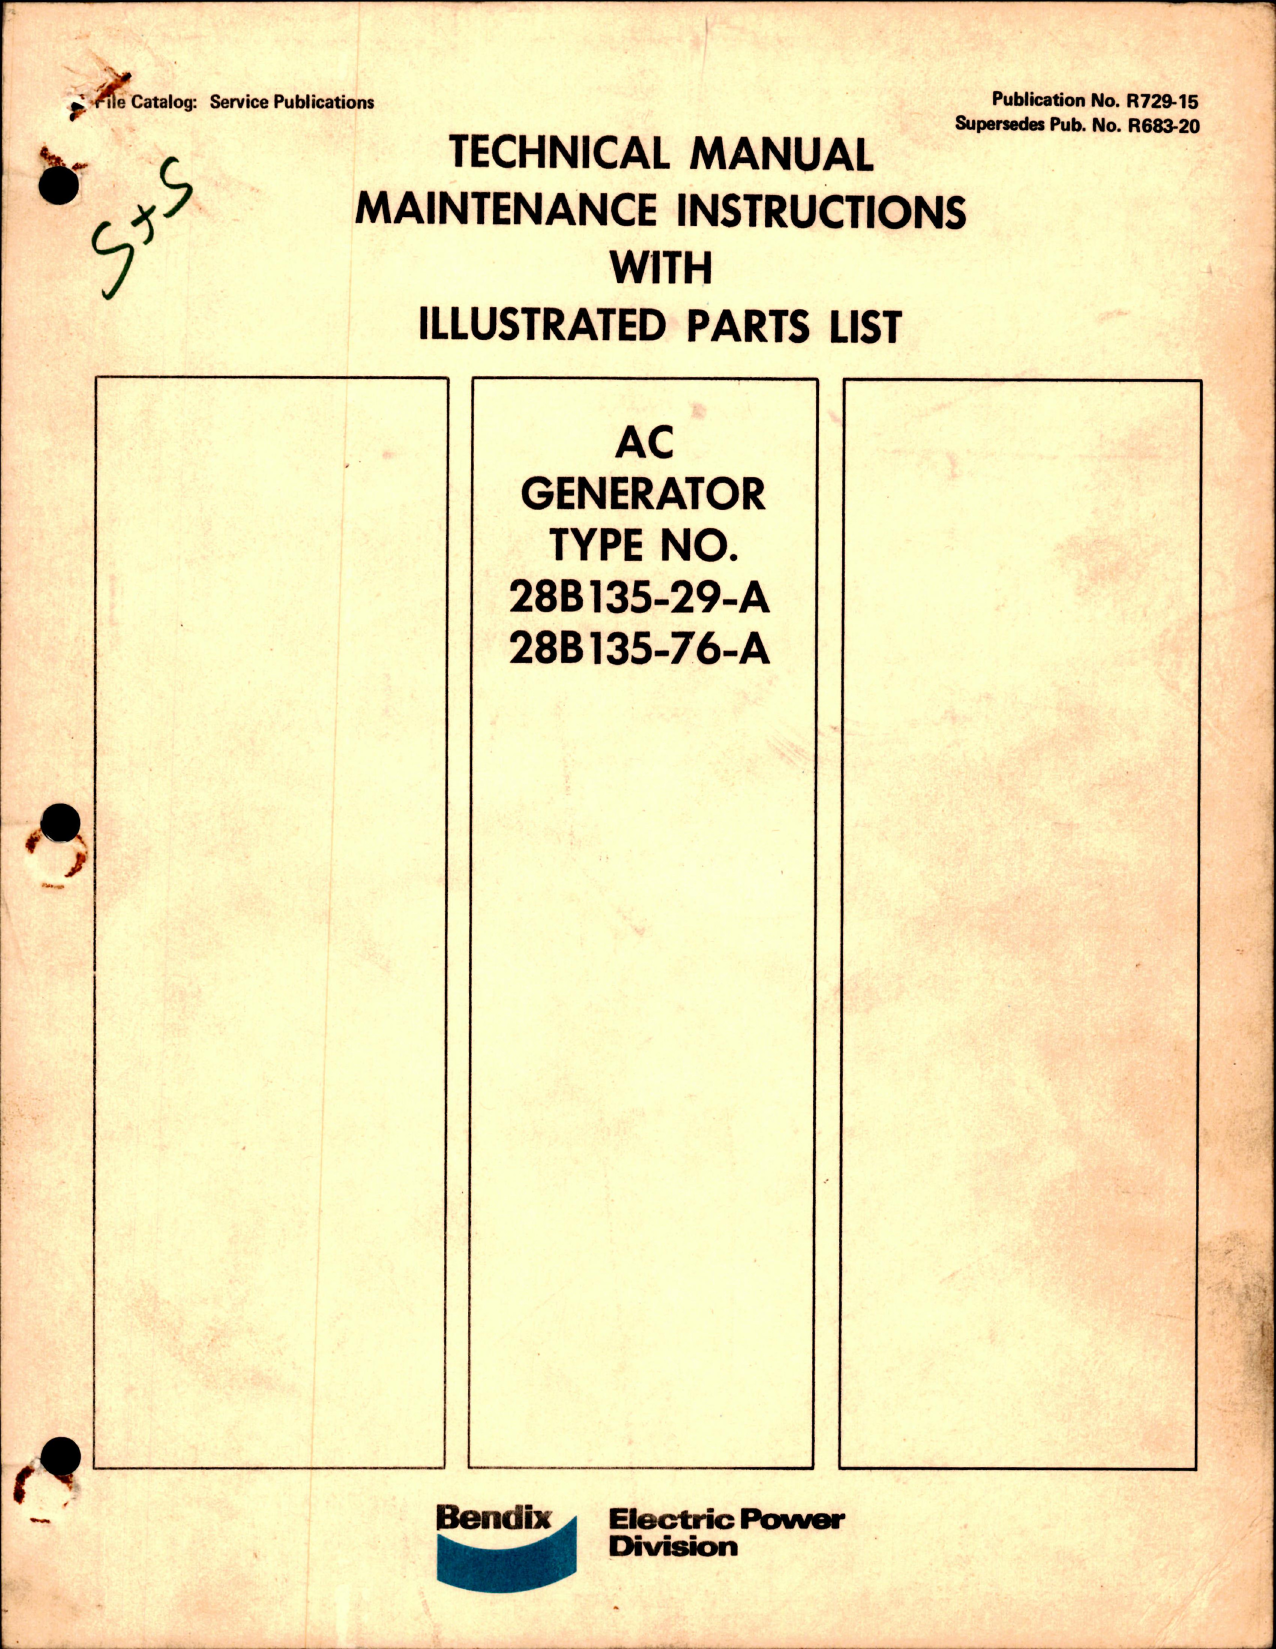 Sample page 1 from AirCorps Library document: Maintenance Instructions with Parts for AC Generator - Type 28B135-29-A, 28B135-76-A